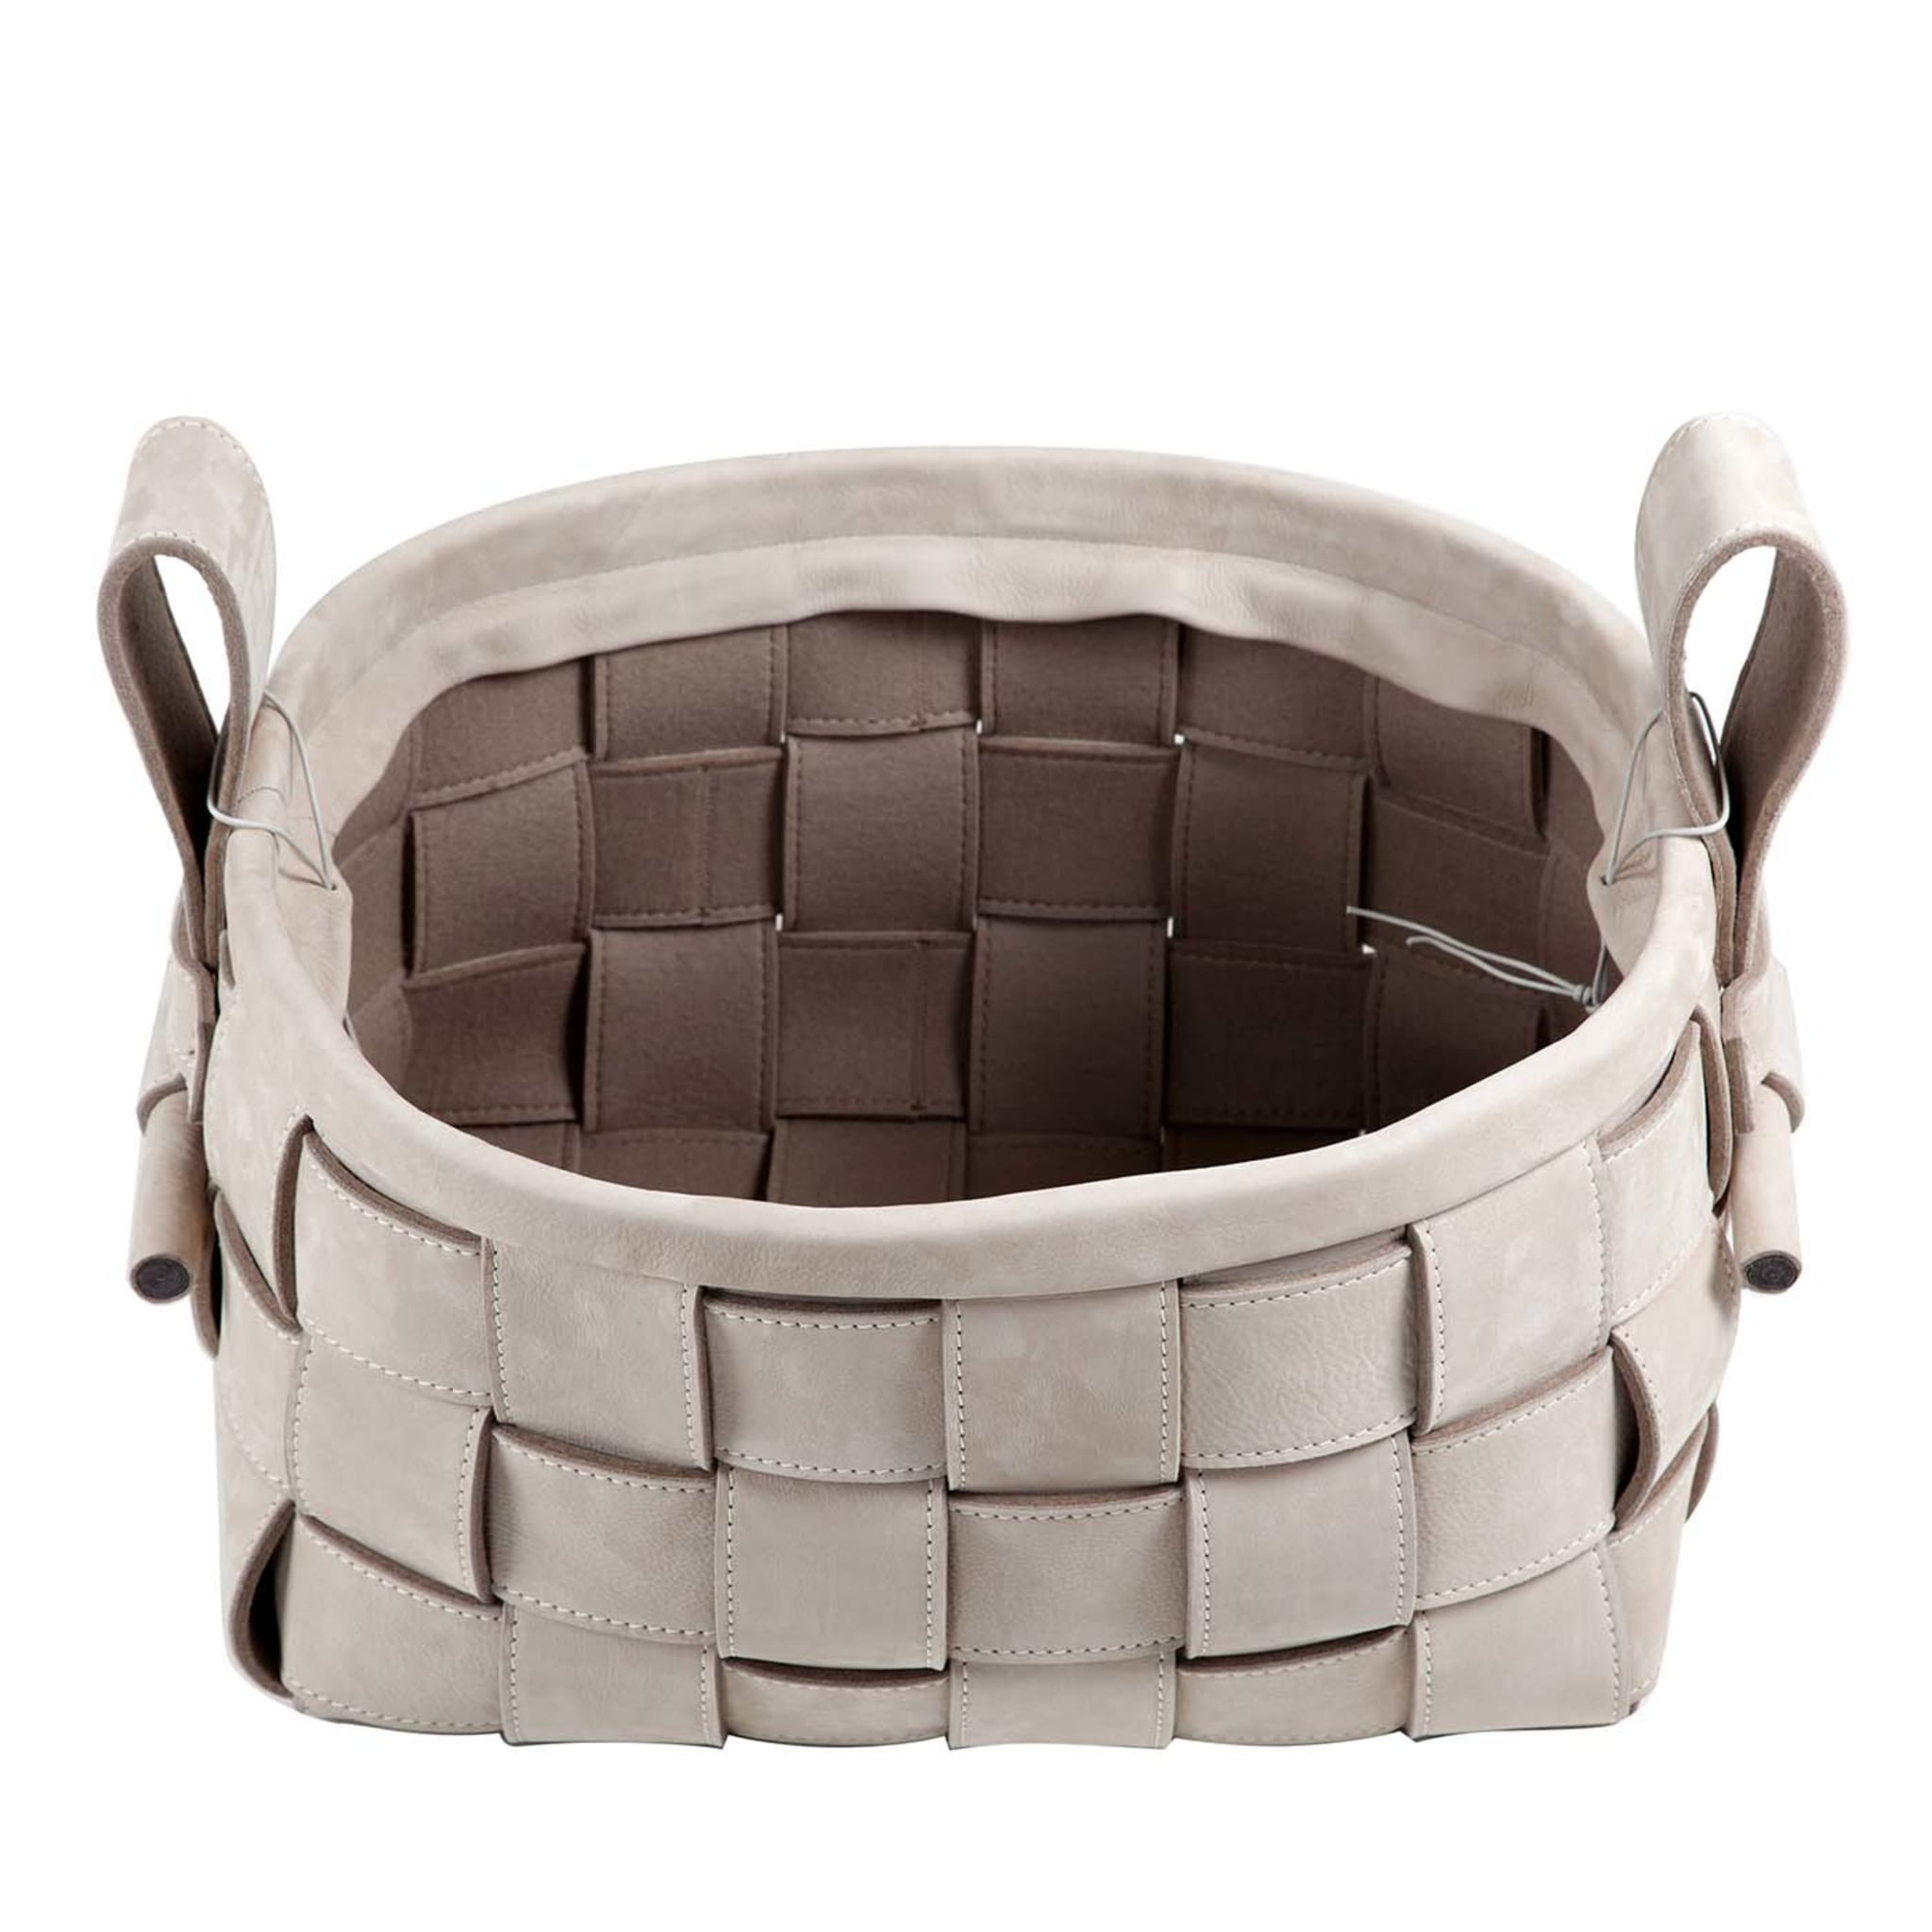 Woven Leather Basket Gray - Main view